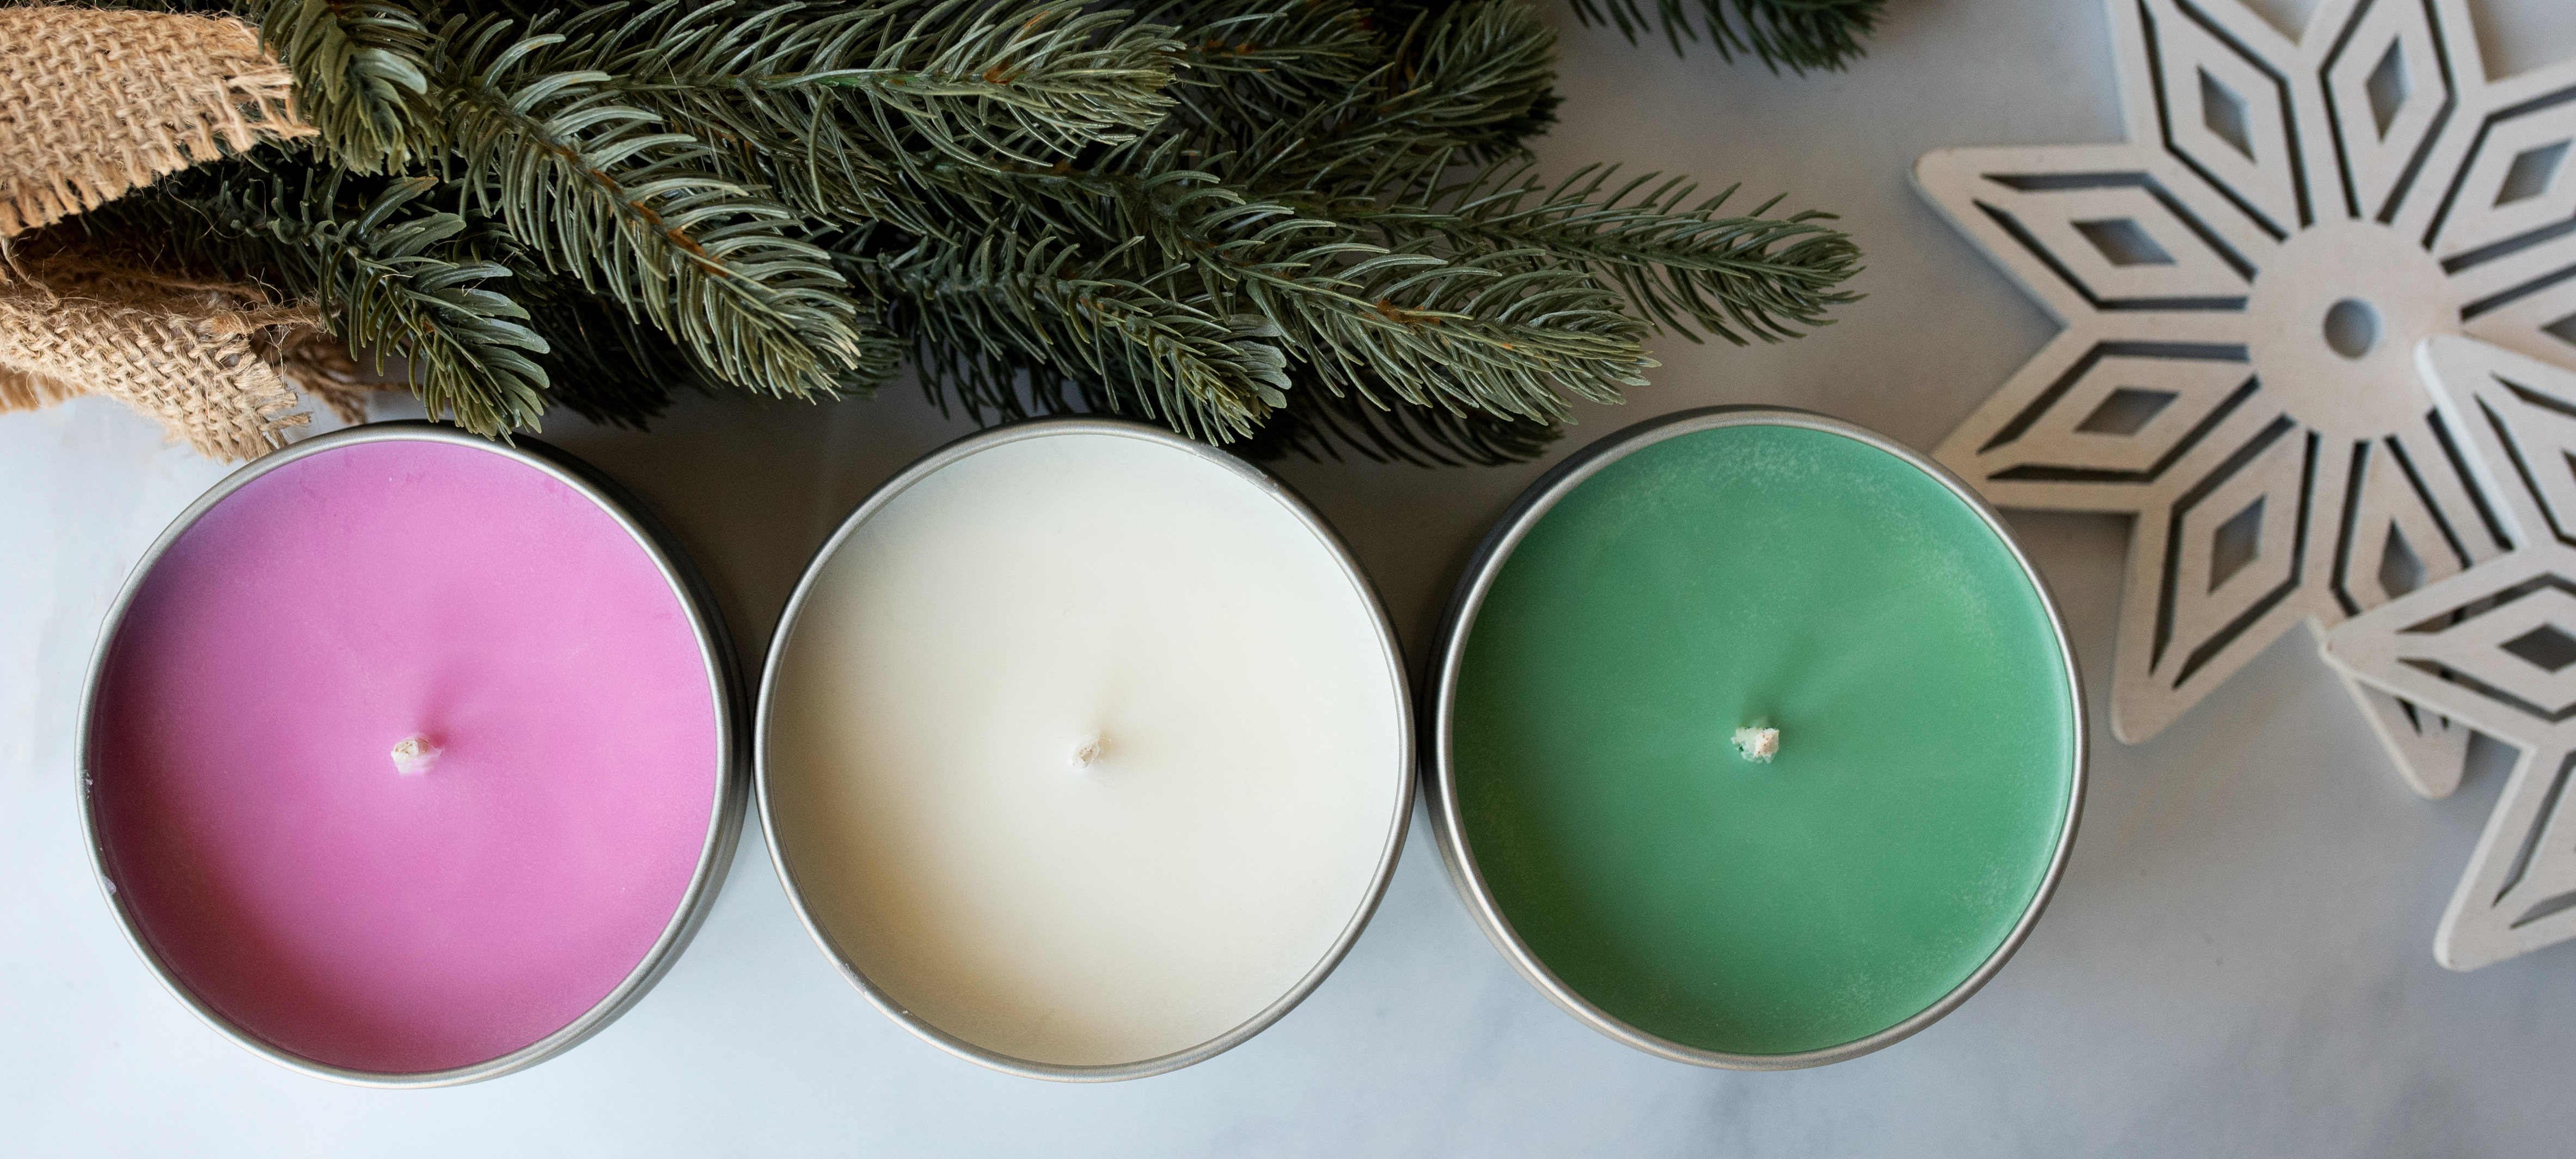 Soy candle tins lined up in holiday colors.